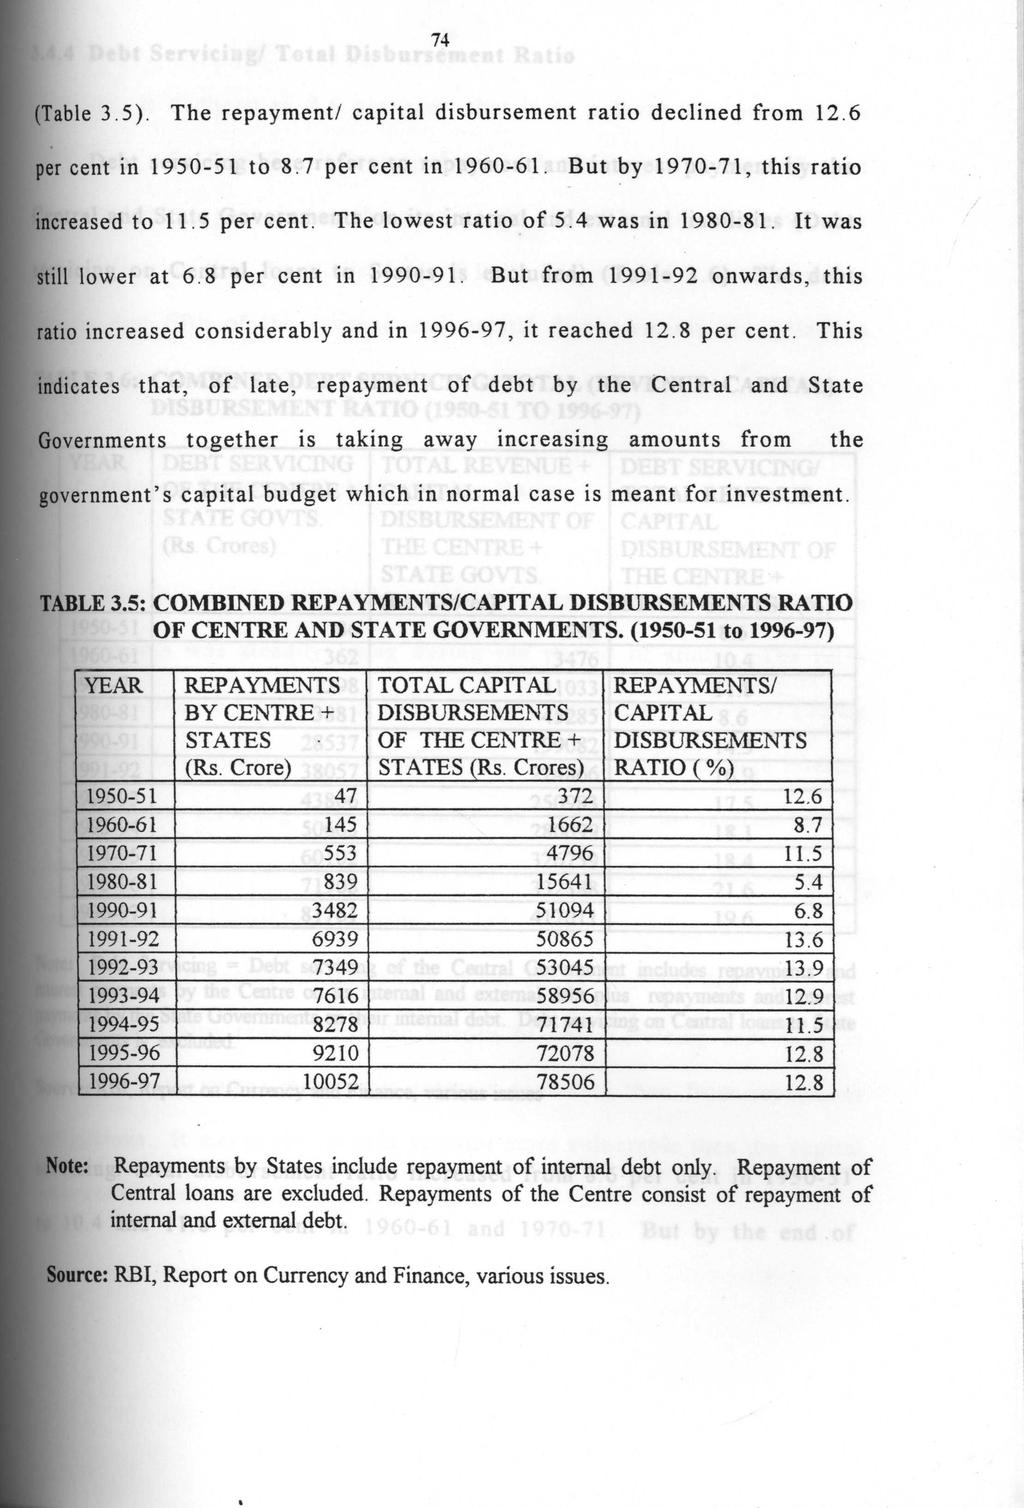 74 (Table 3.5). The repayment/ capital disbursement ratio declined from 12.6 per cent in 1950-51 to 8.7 per cent in 1960-61. But by 1970-71, this ratio increased to 11.5 per cent.